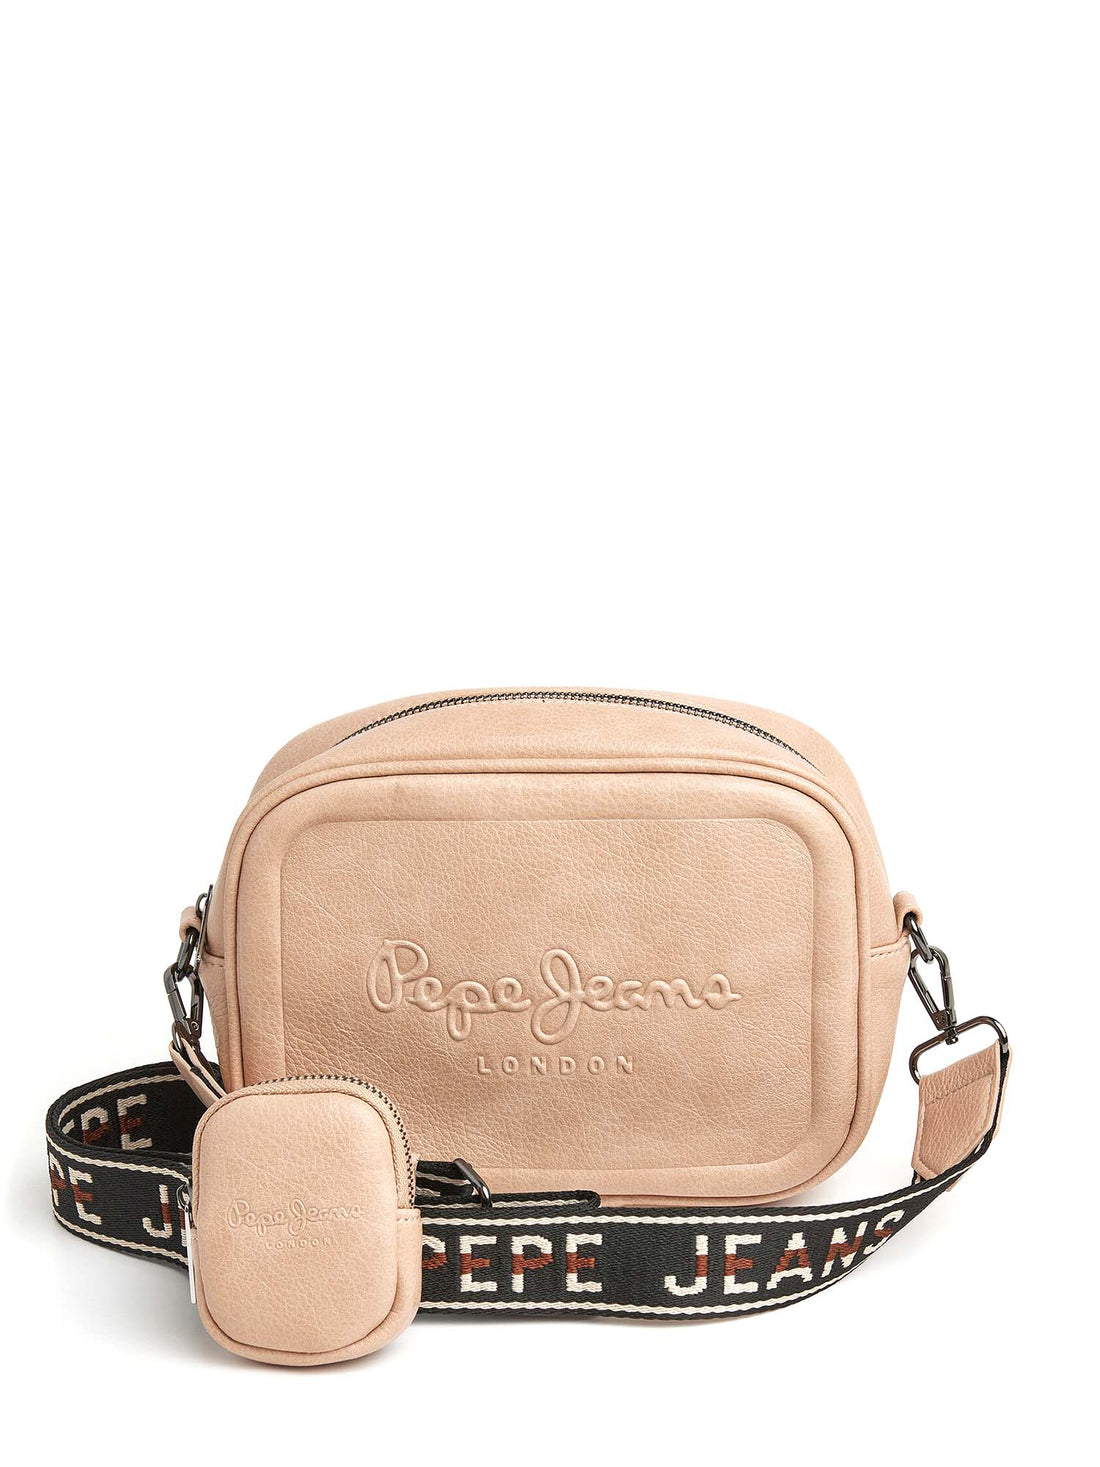 Tracolla Beige Pepe Jeans